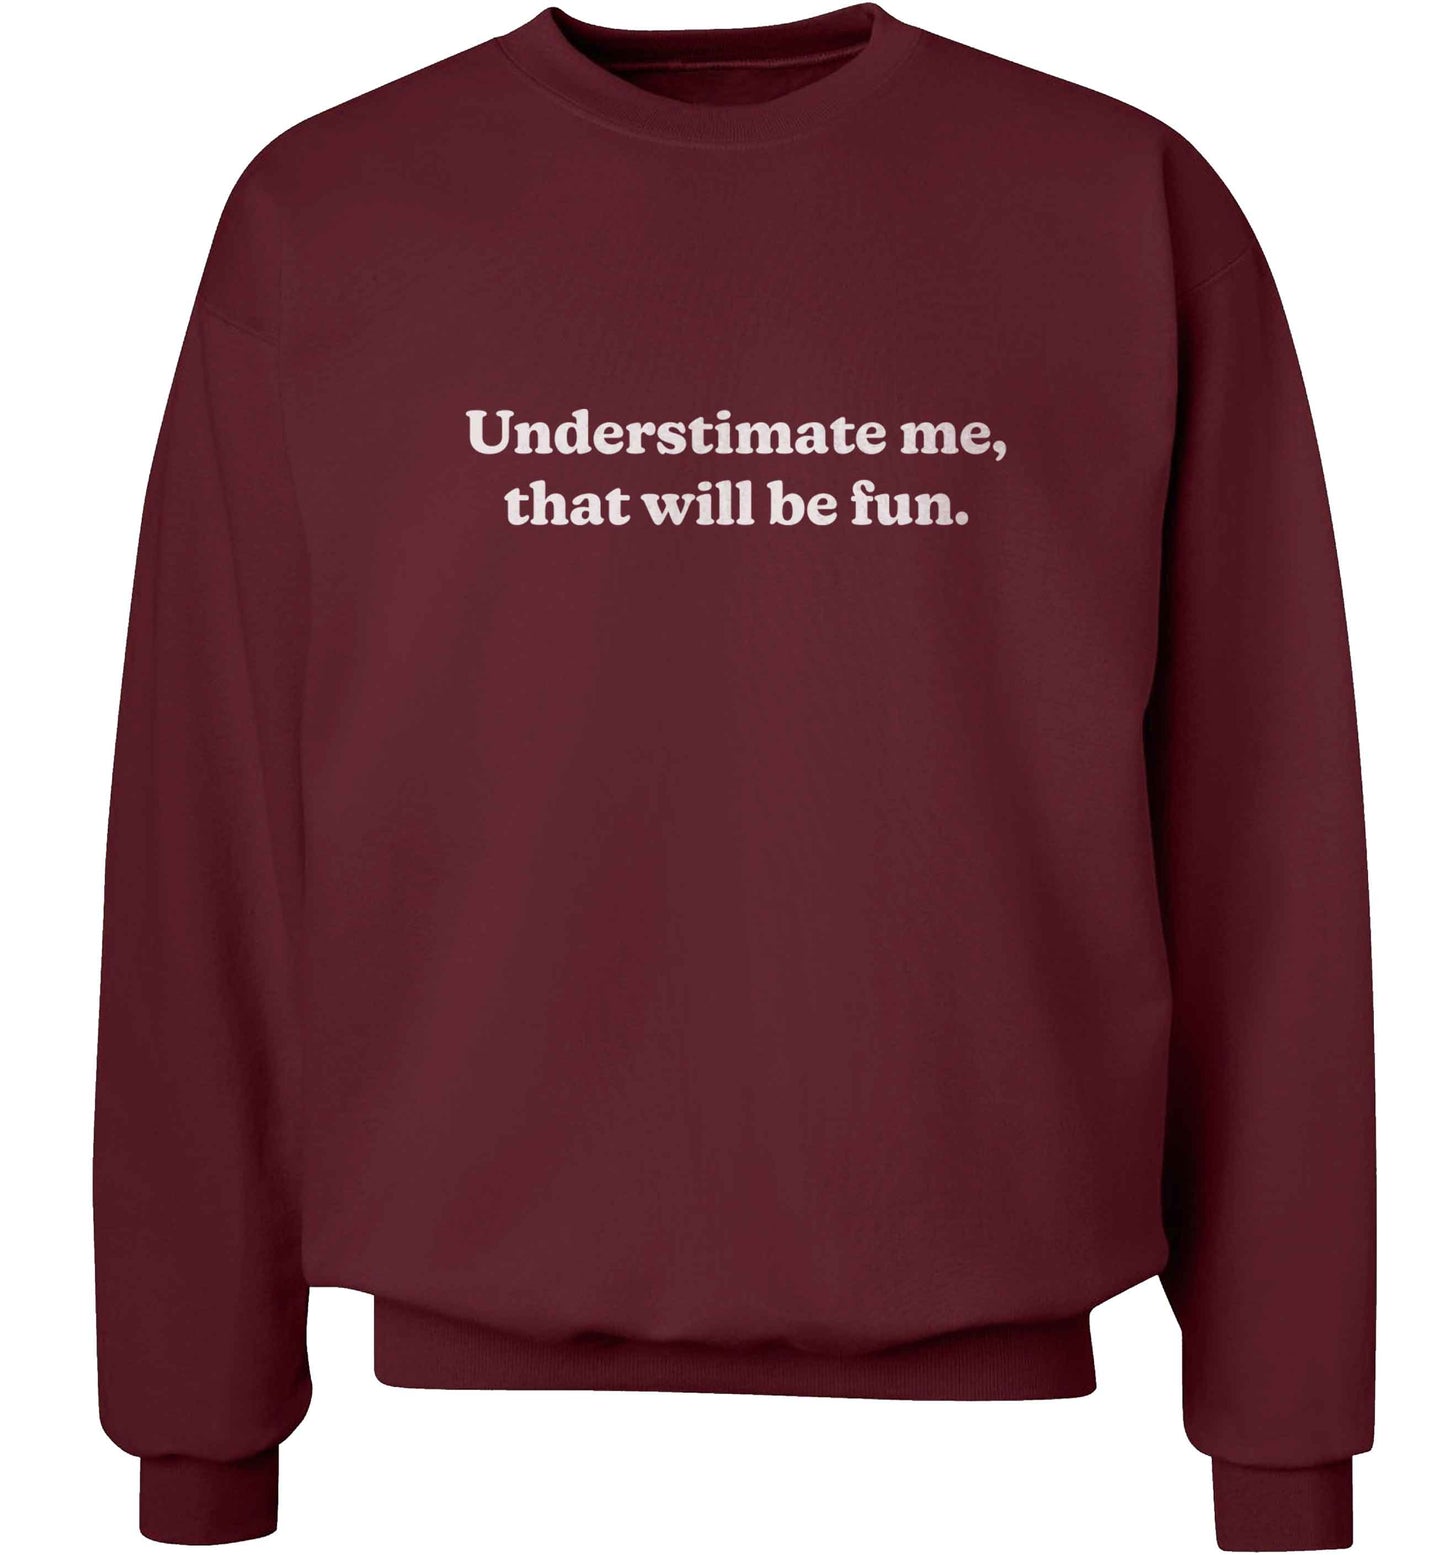 Underestimate me that will be fun adult's unisex maroon sweater 2XL